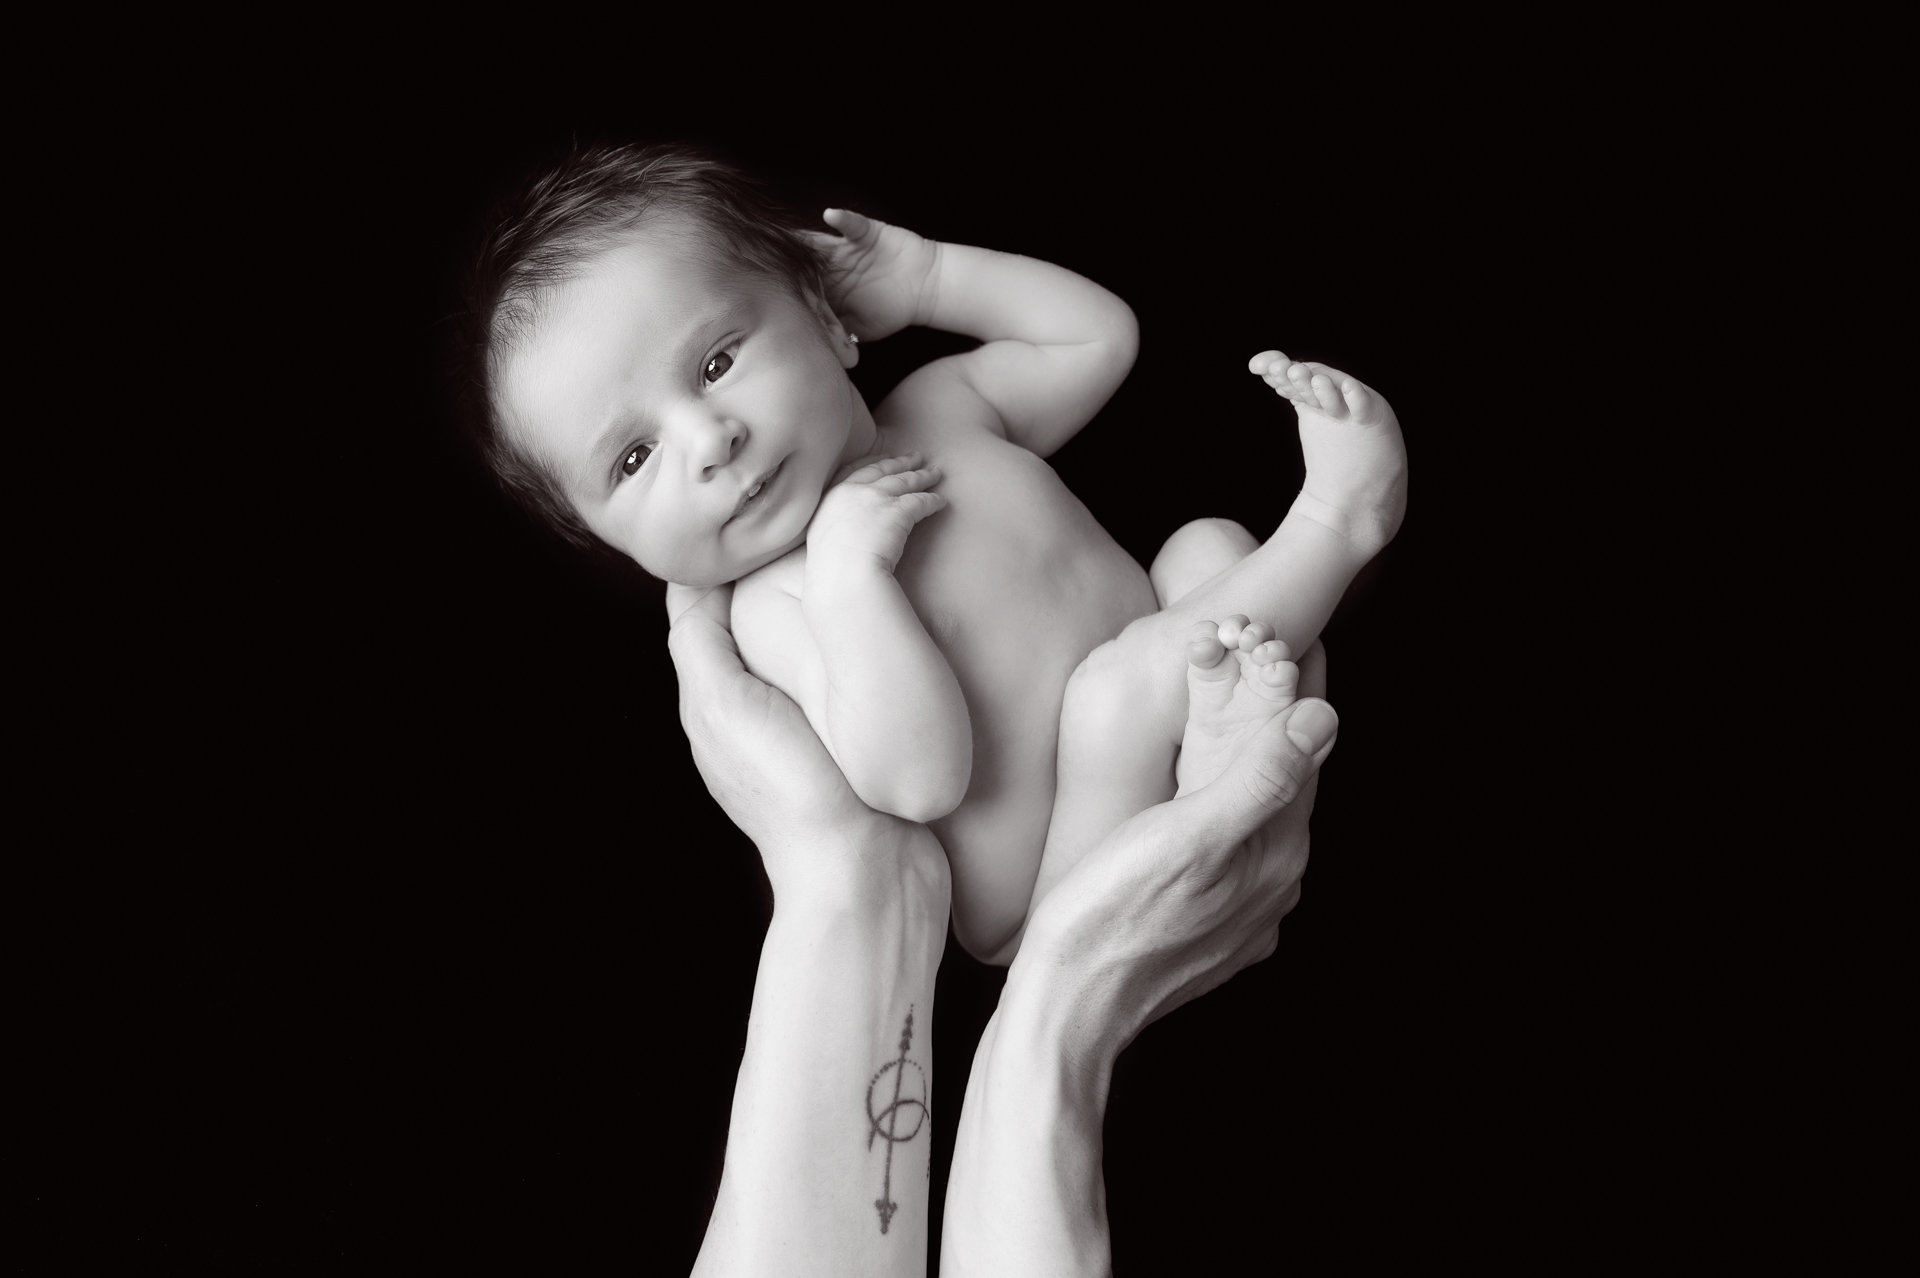 Newborn girl is held by parents by one of each parents hands. Tattoo on wrist. Black and white image.